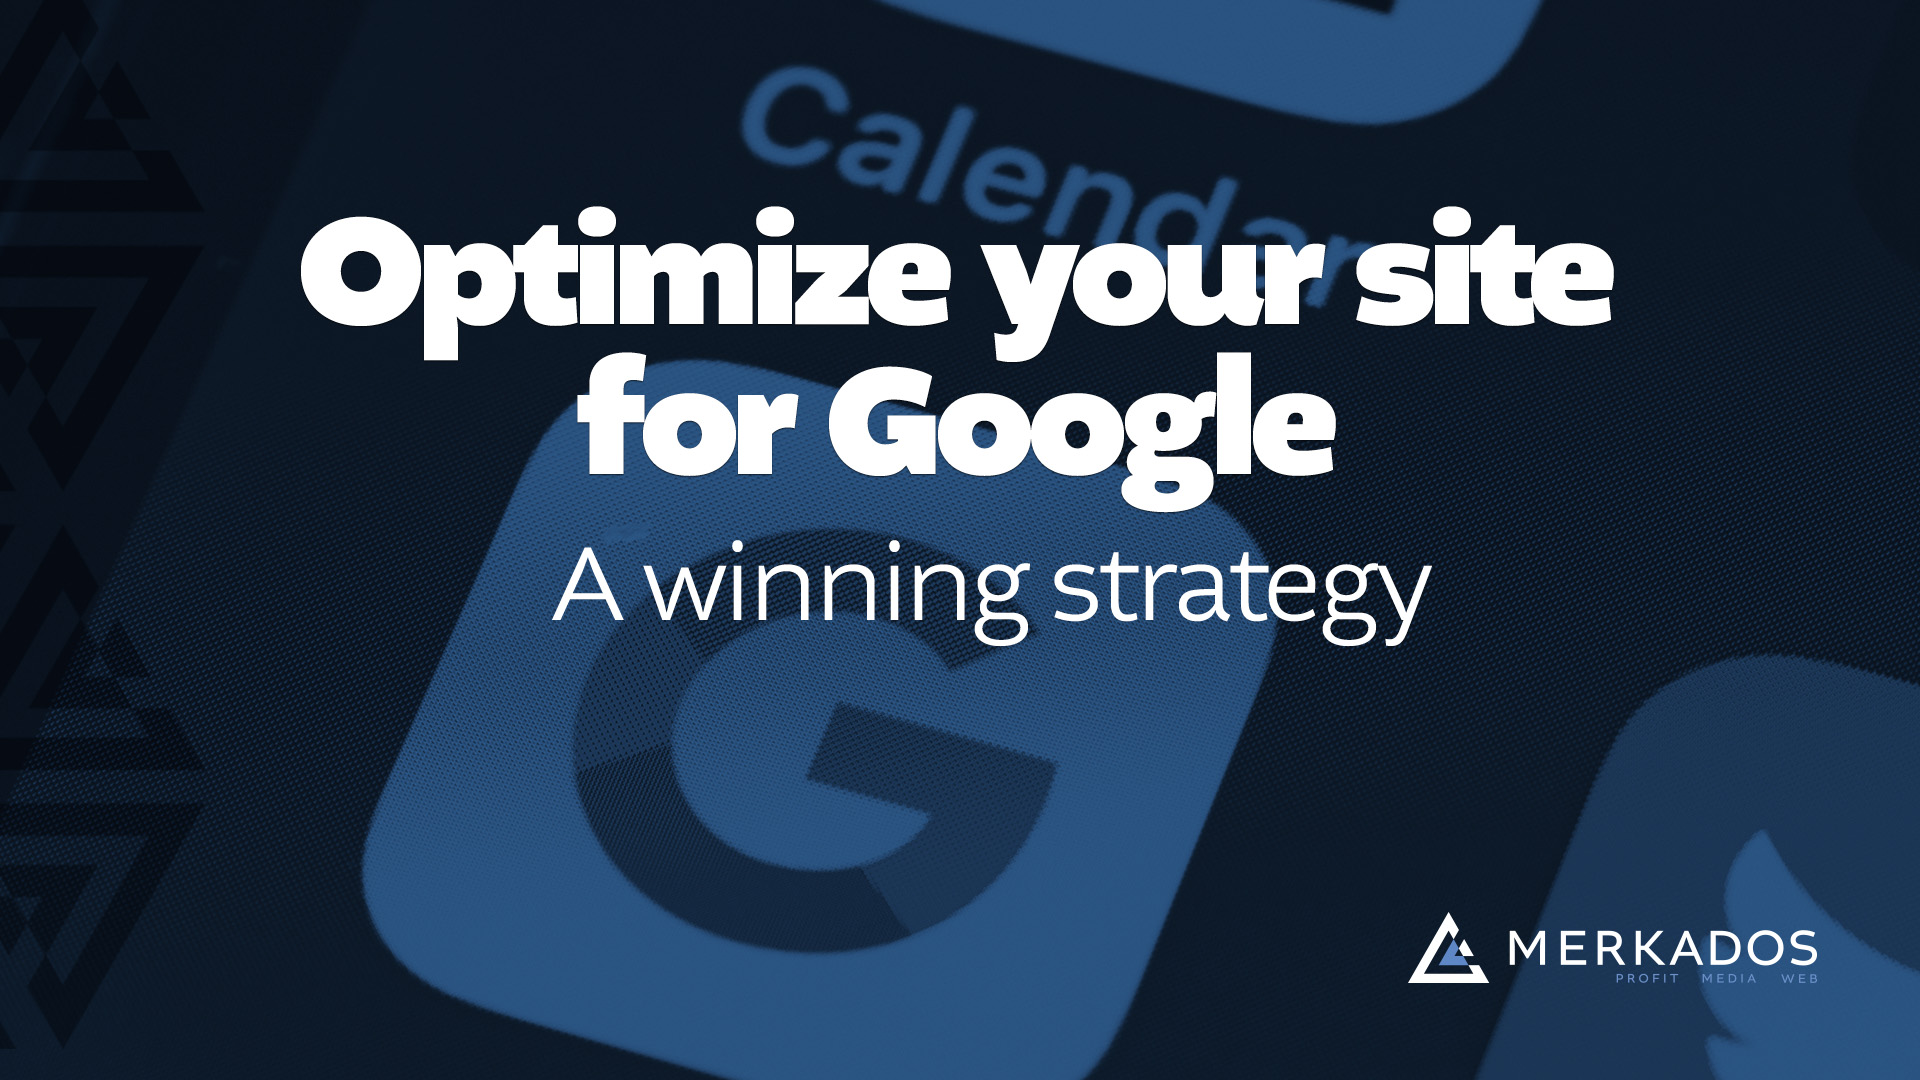 Optimizing your site for Google